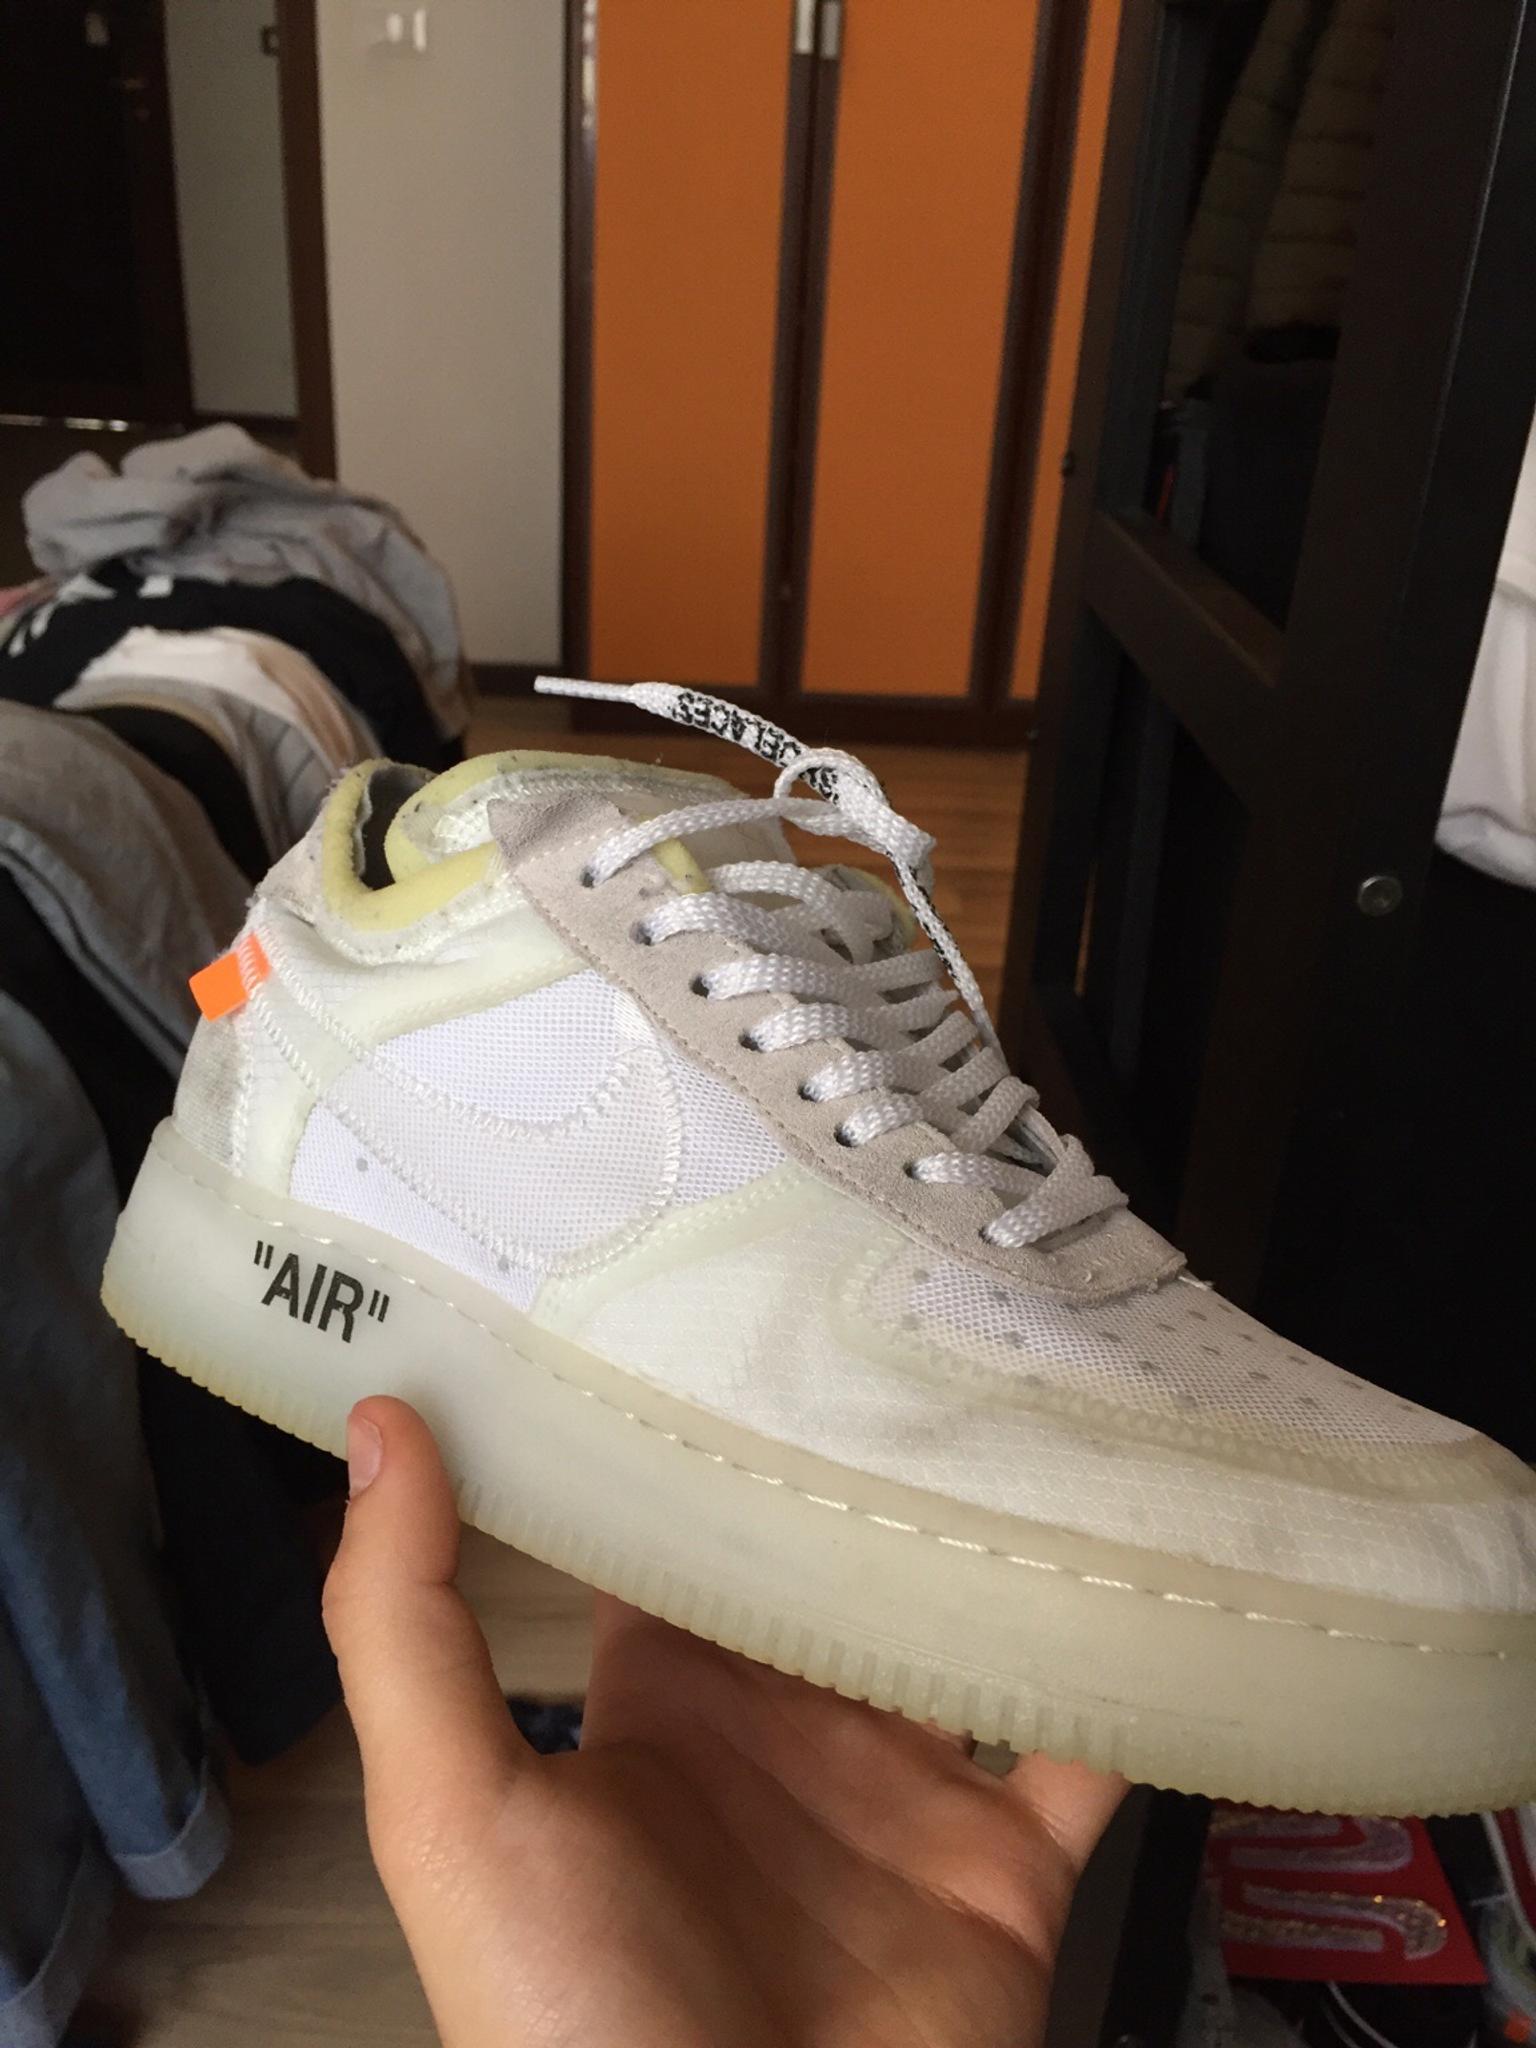 Air force 1 x off white replica in 10139 Torino for €60.00 for sale | Shpock